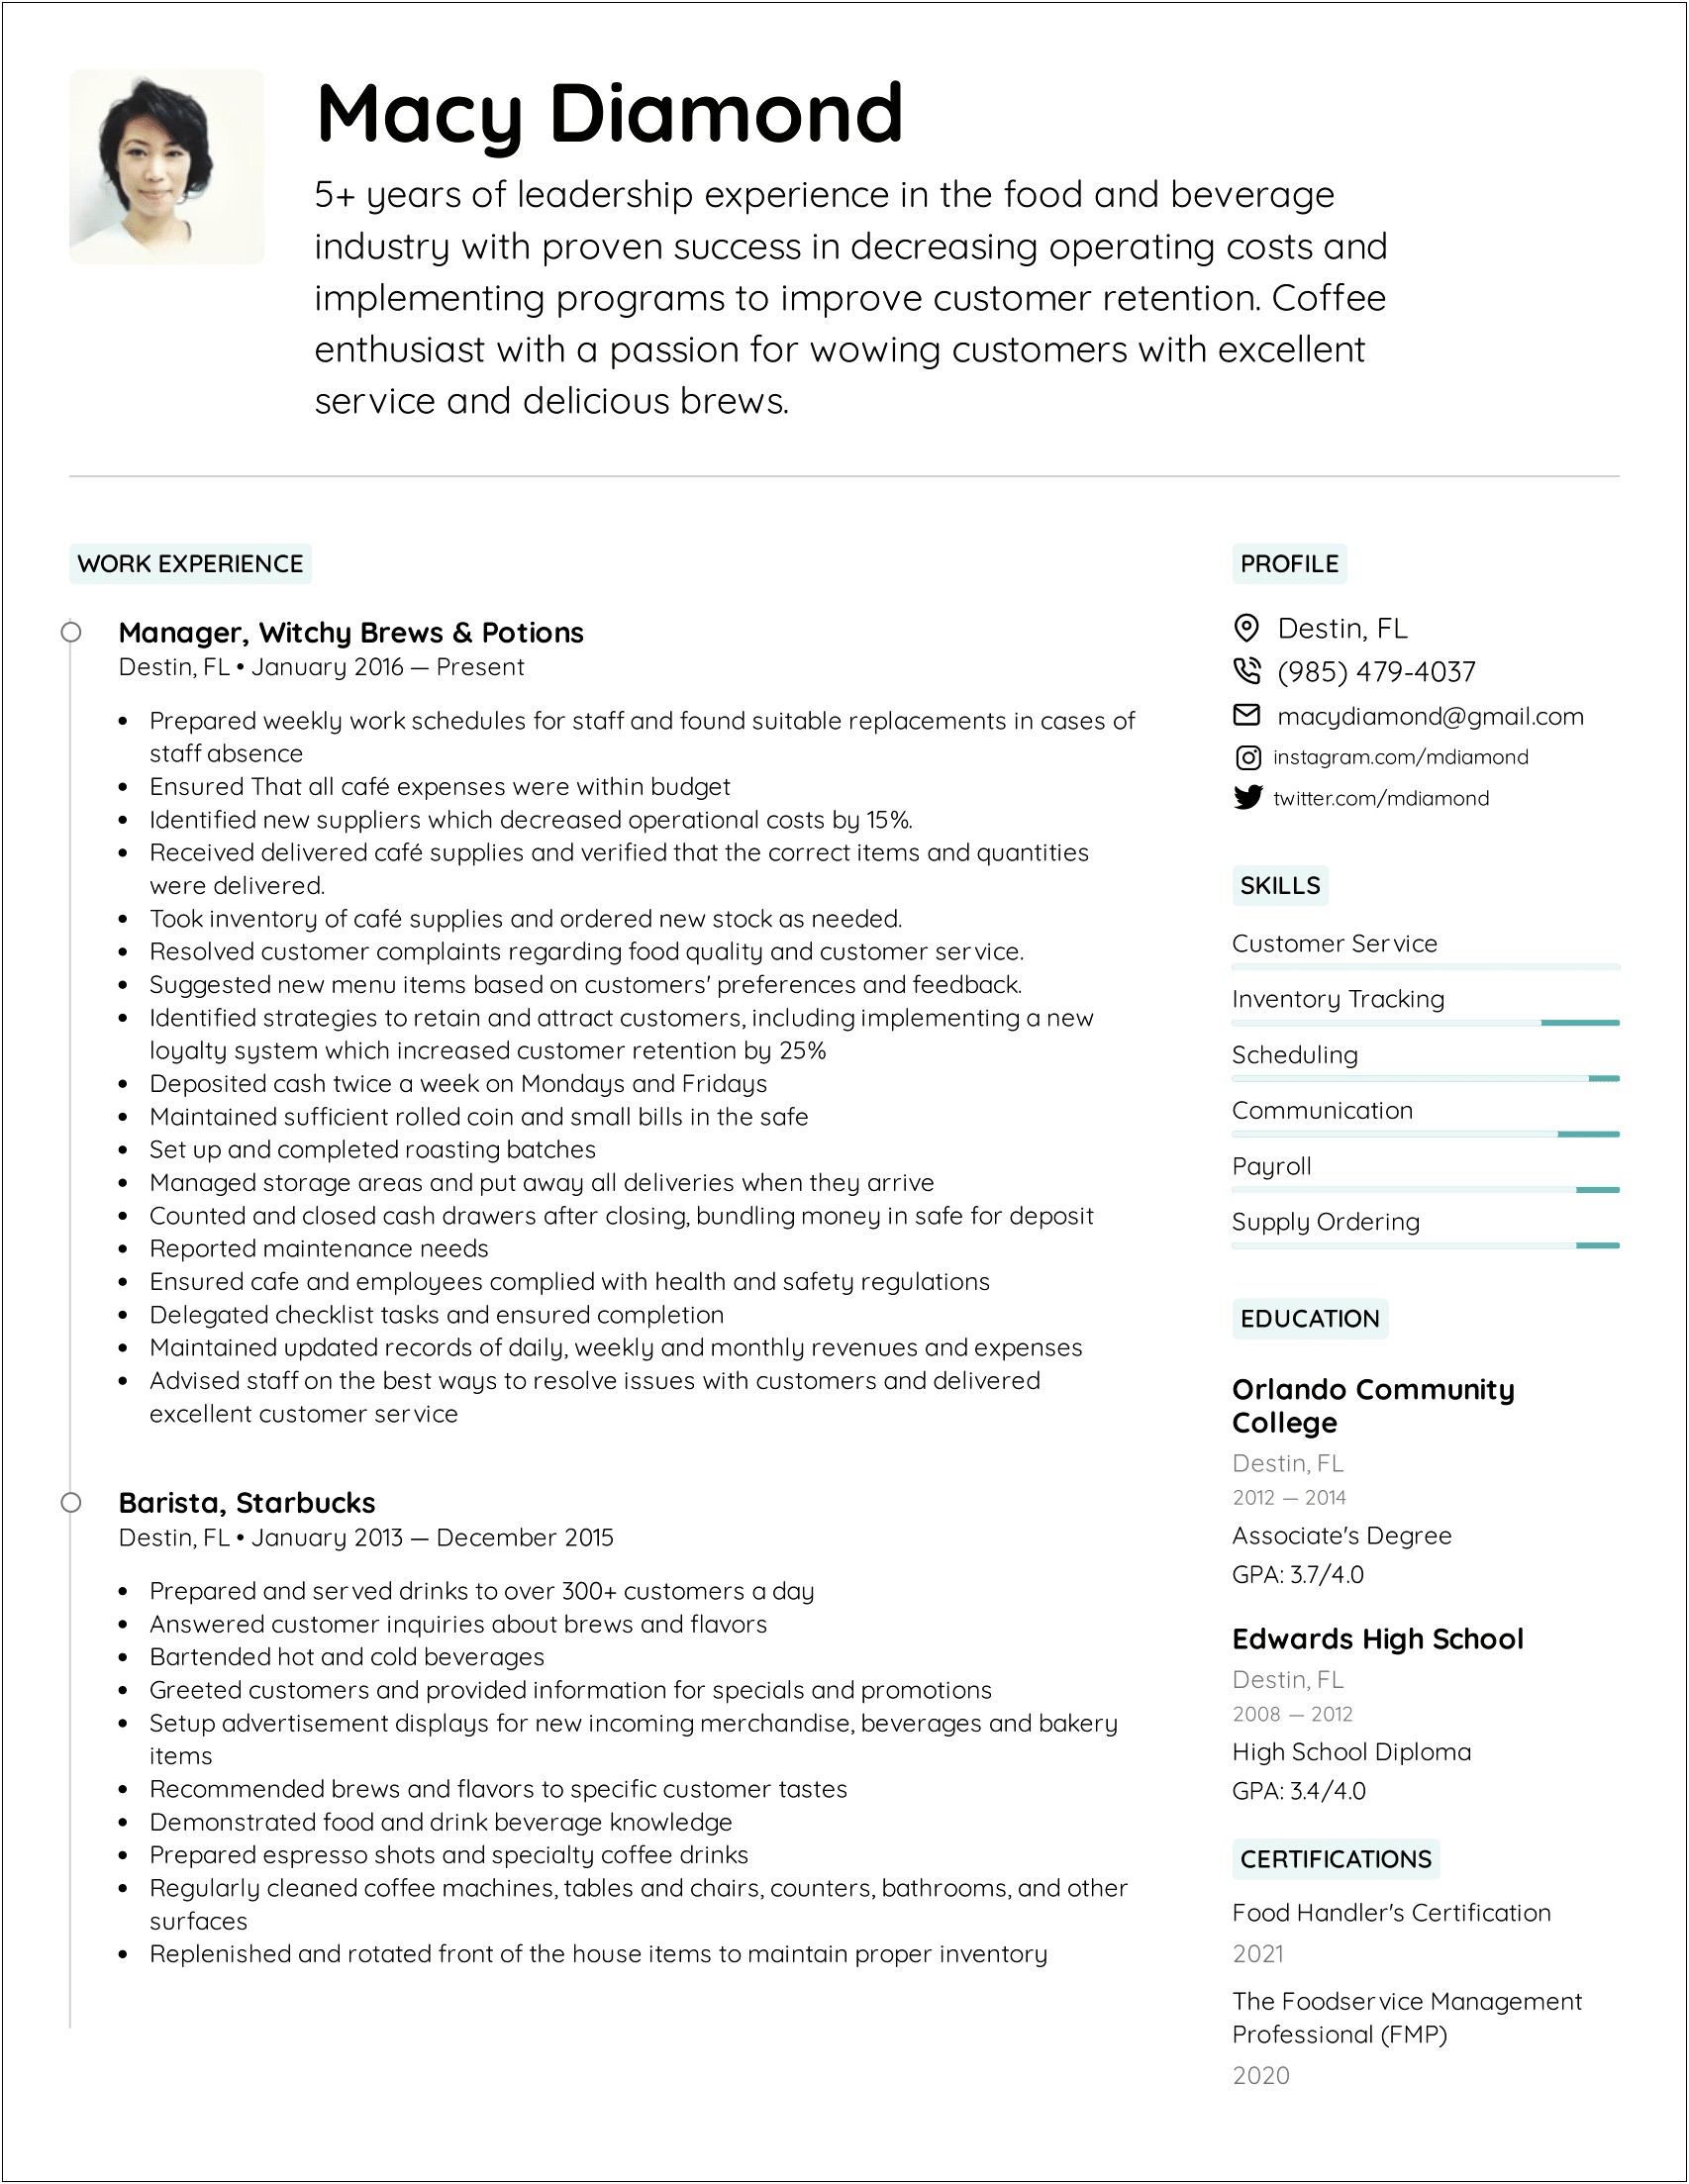 Resume Example With Soft Skills